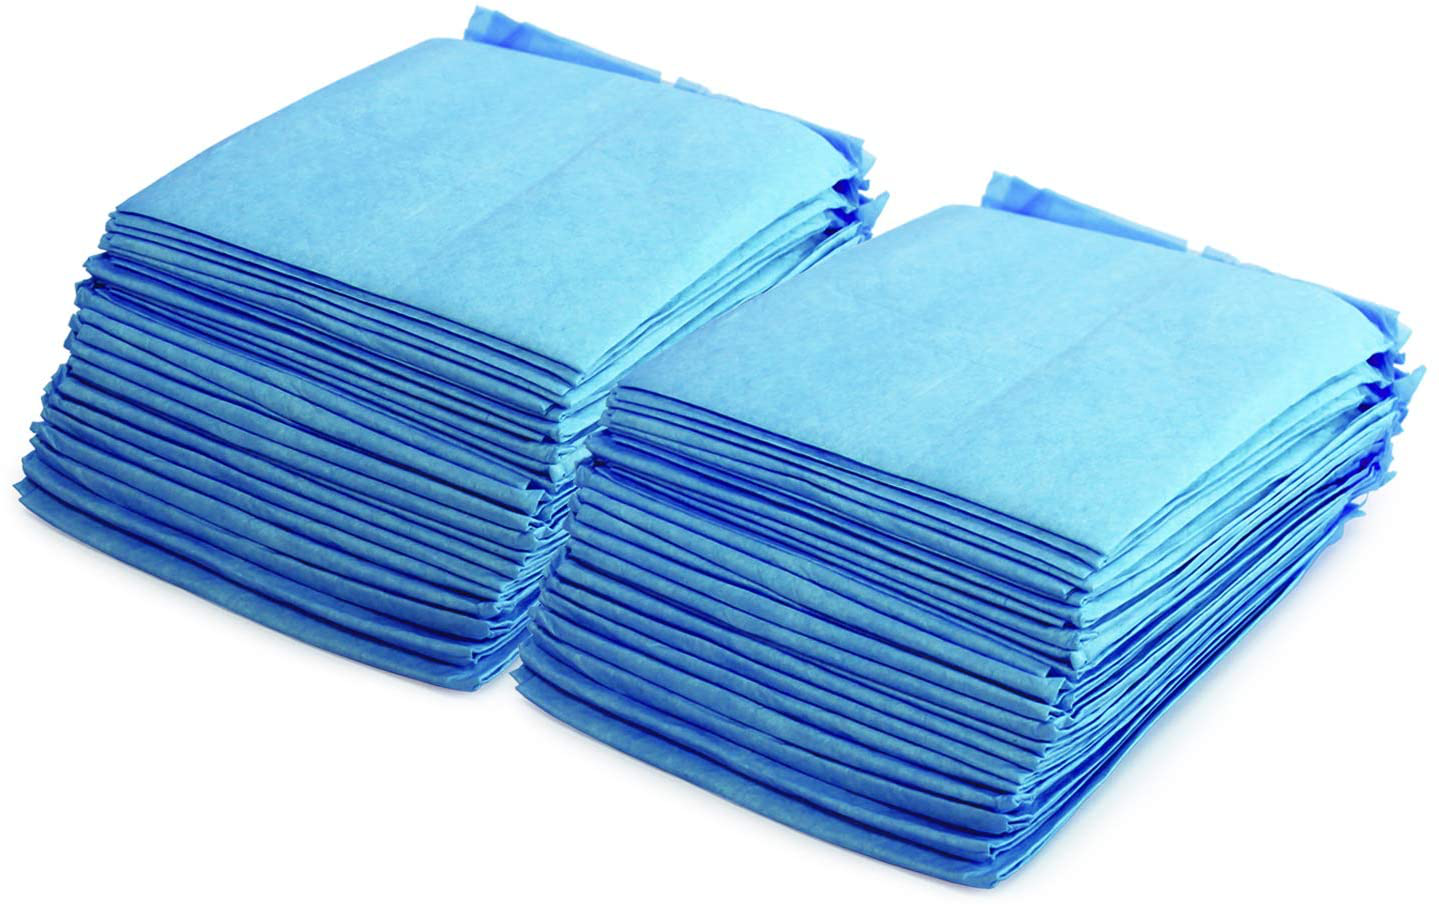 Medpride Disposable Underpads 23'' X 36'' (50-Count) Incontinence